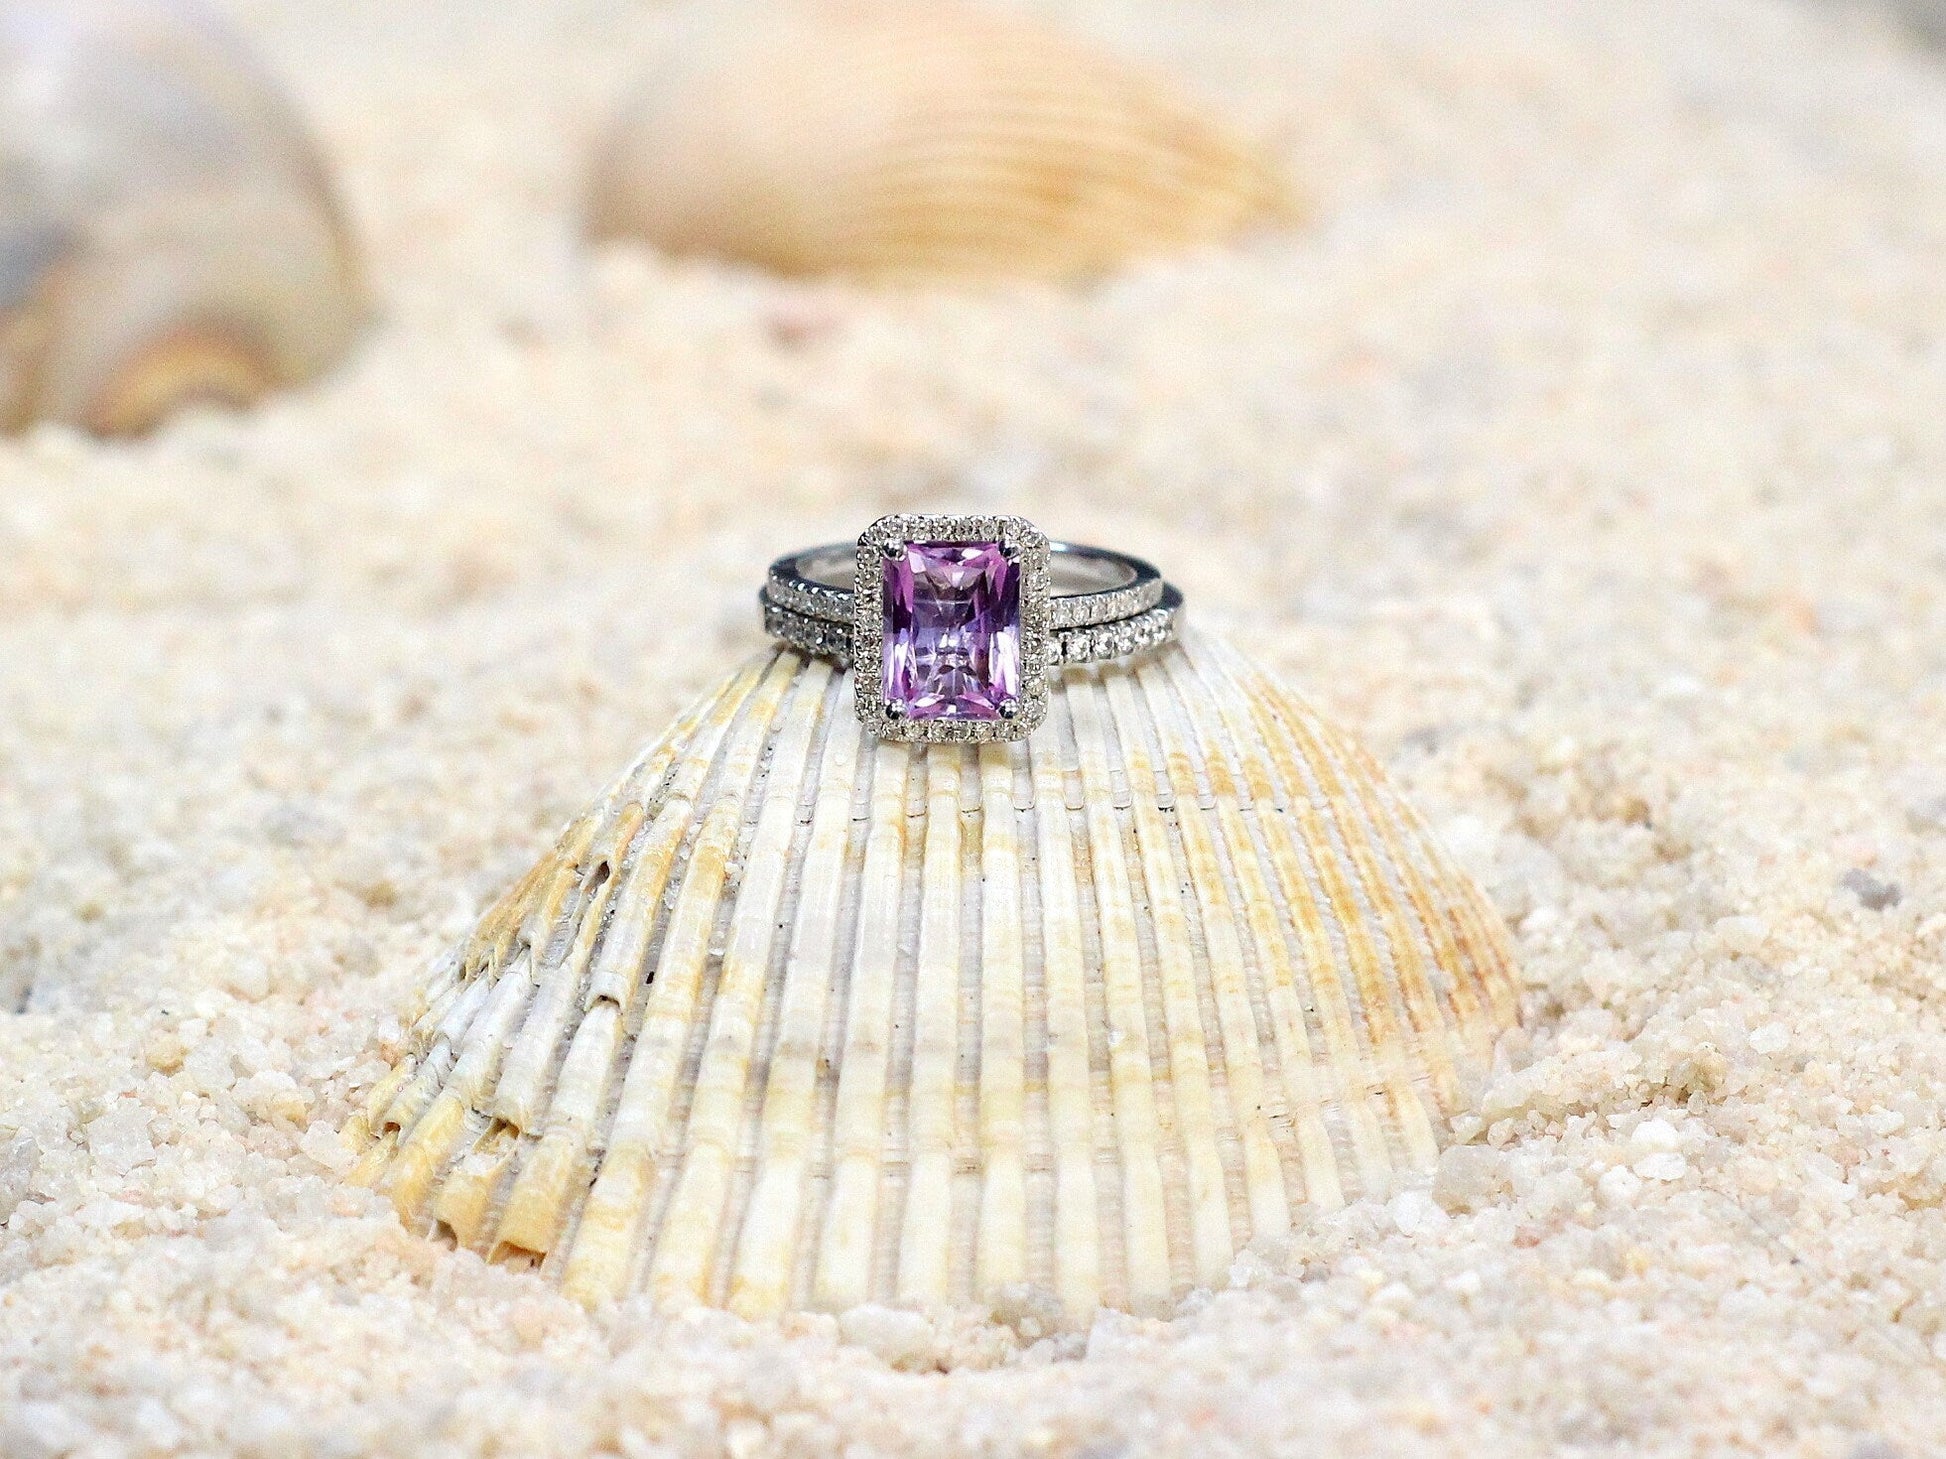 Pink Sapphire Enagement Ring Set, Diamond Emerald Halo, Ione, 2ct,wedding ring set,promise ring, gift ofr her BellaMoreDesign.com